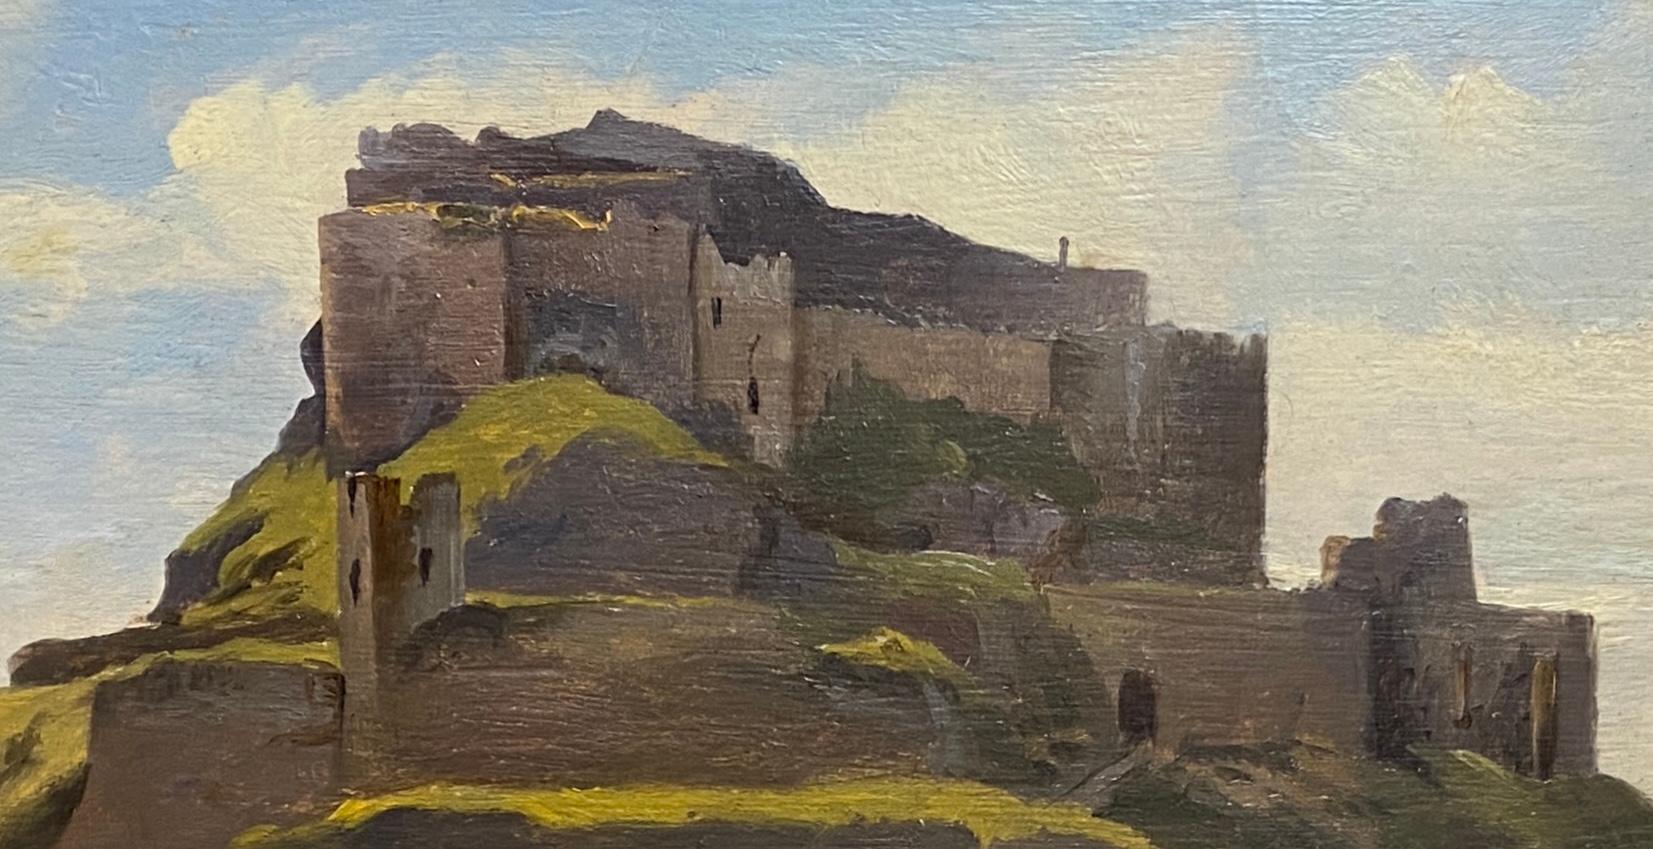 Oil on board, signed lower right
Image size: 10 x 15 1/4 inches (51 x 39 cm)
Gilt frame

This is a landscape of Baden-Wurttemberg, a German state. The castle depicted is the Hochburg Castle, found near Emmendingen at the foothills of the Black